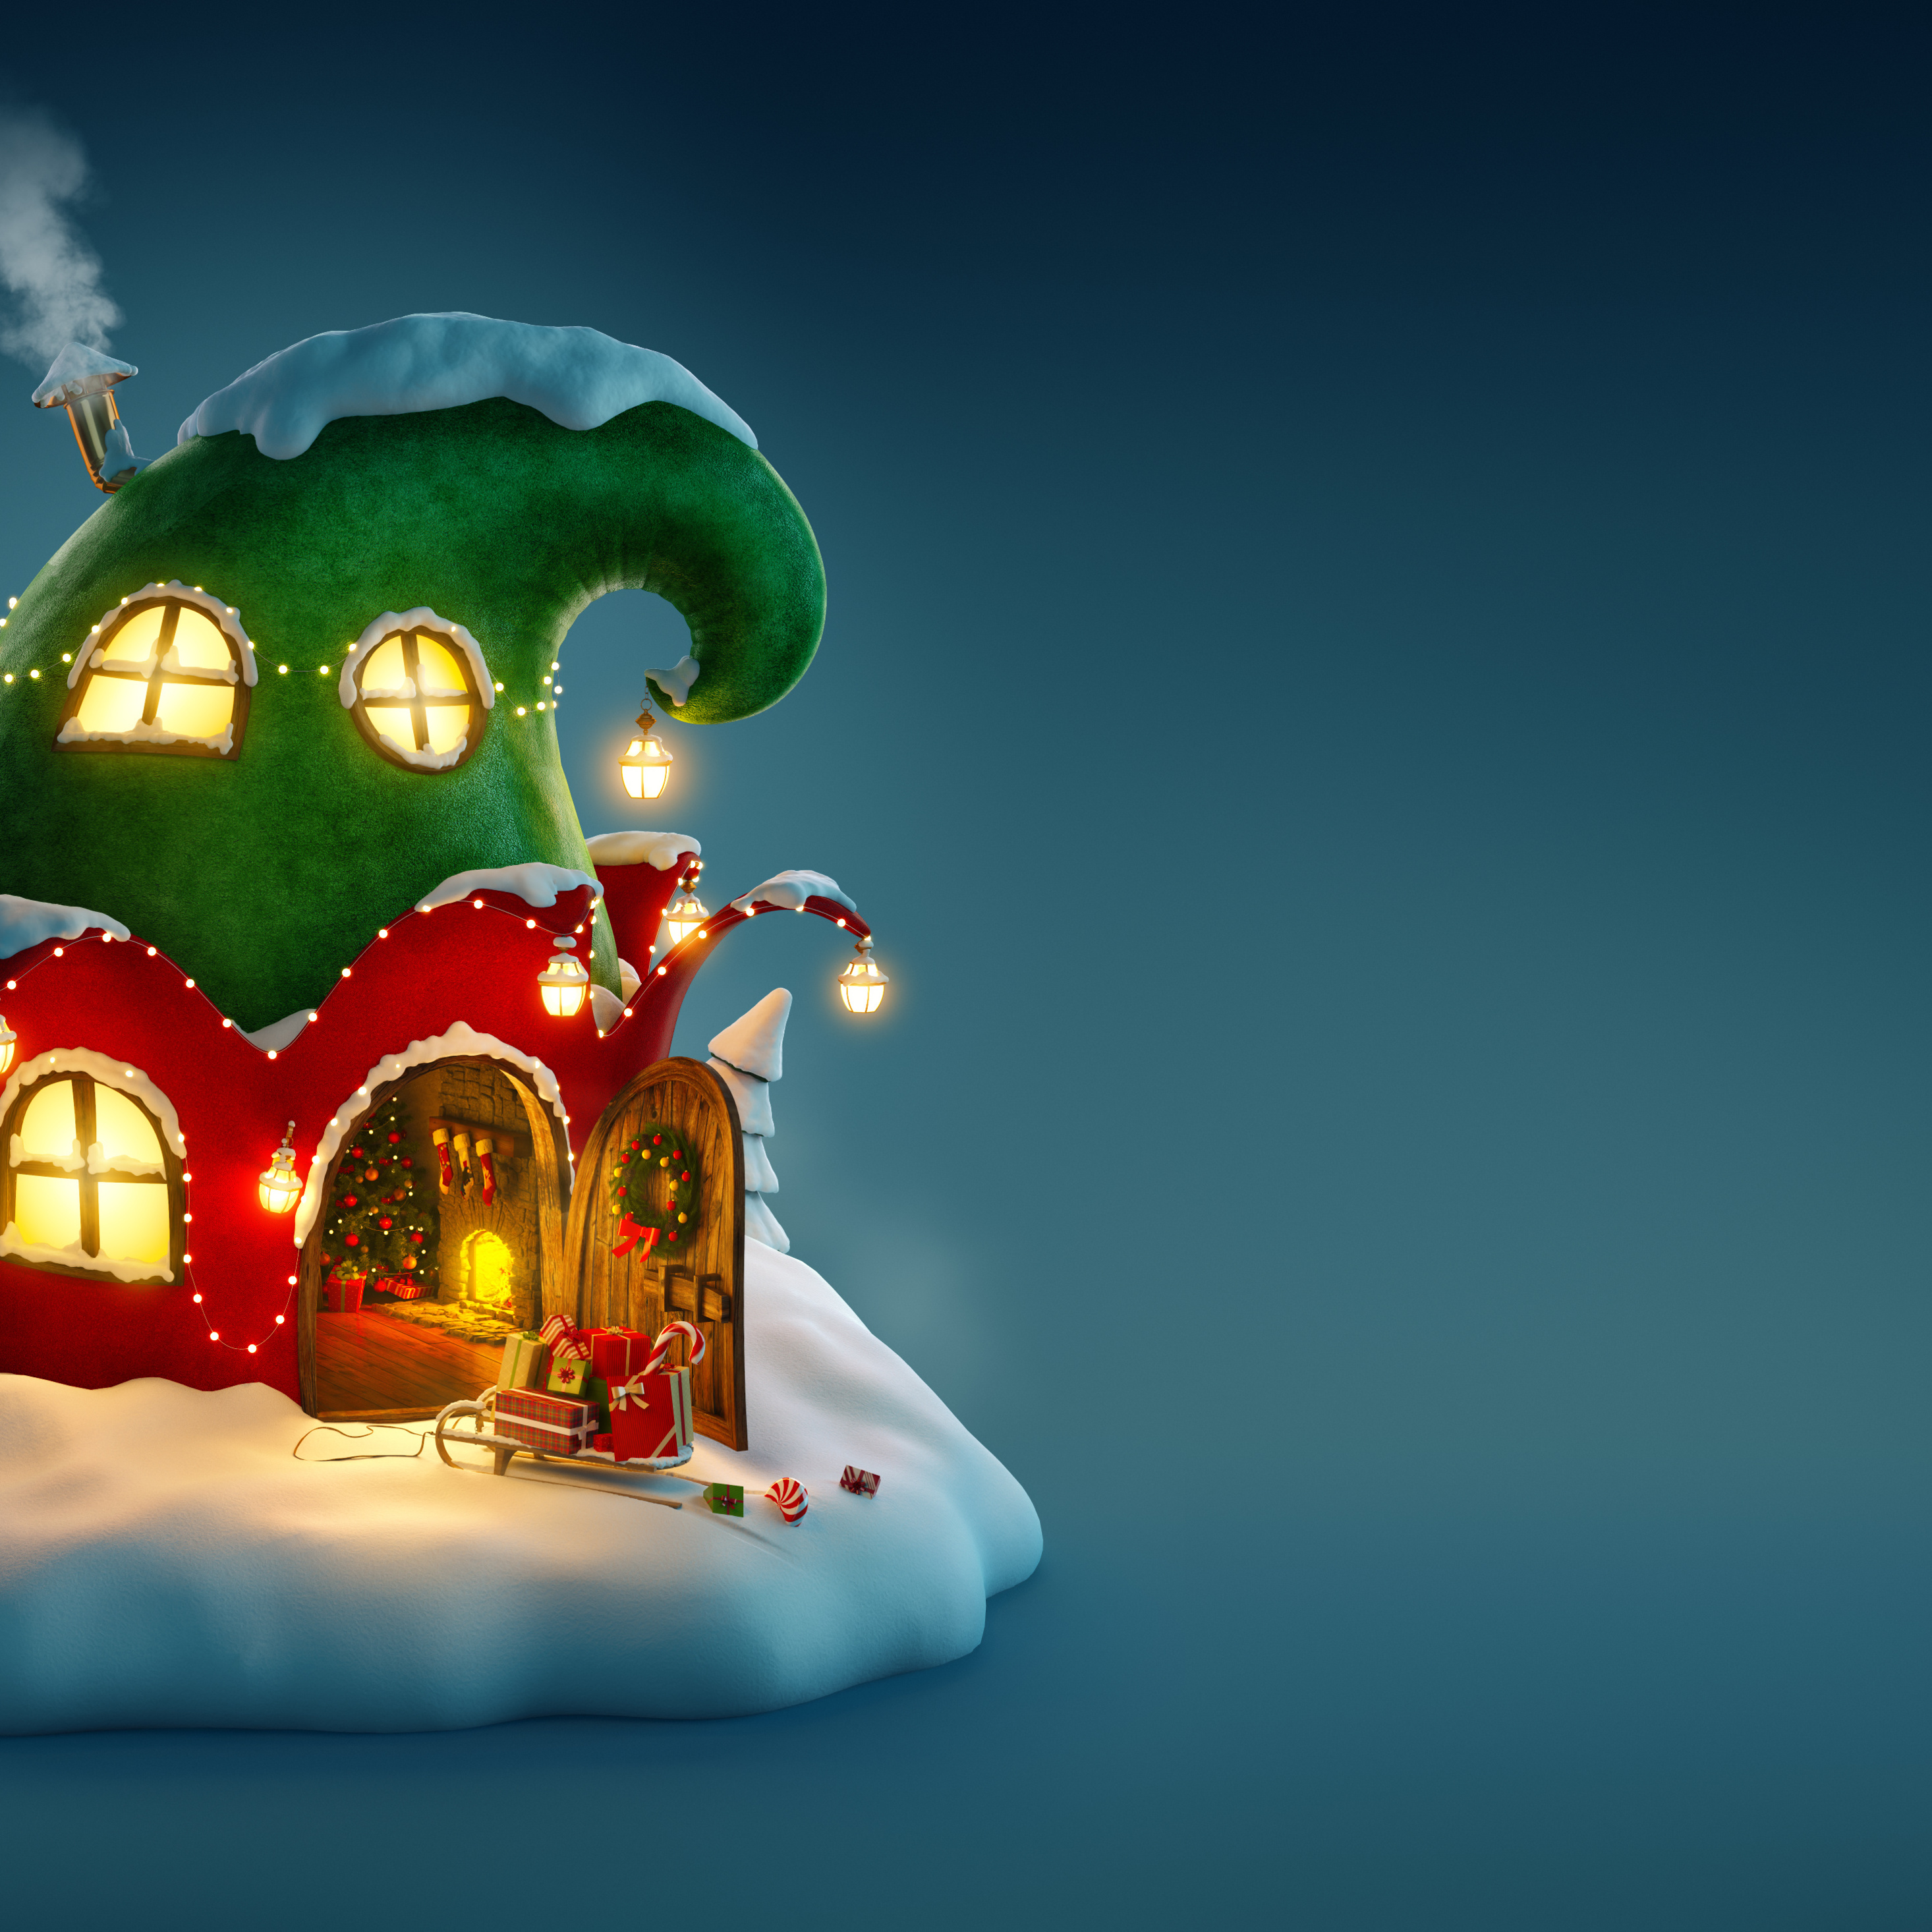 2932x2932 Christmas Fairy House 4k Ipad Pro Retina Display HD 4k Wallpapers,  Images, Backgrounds, Photos and Pictures